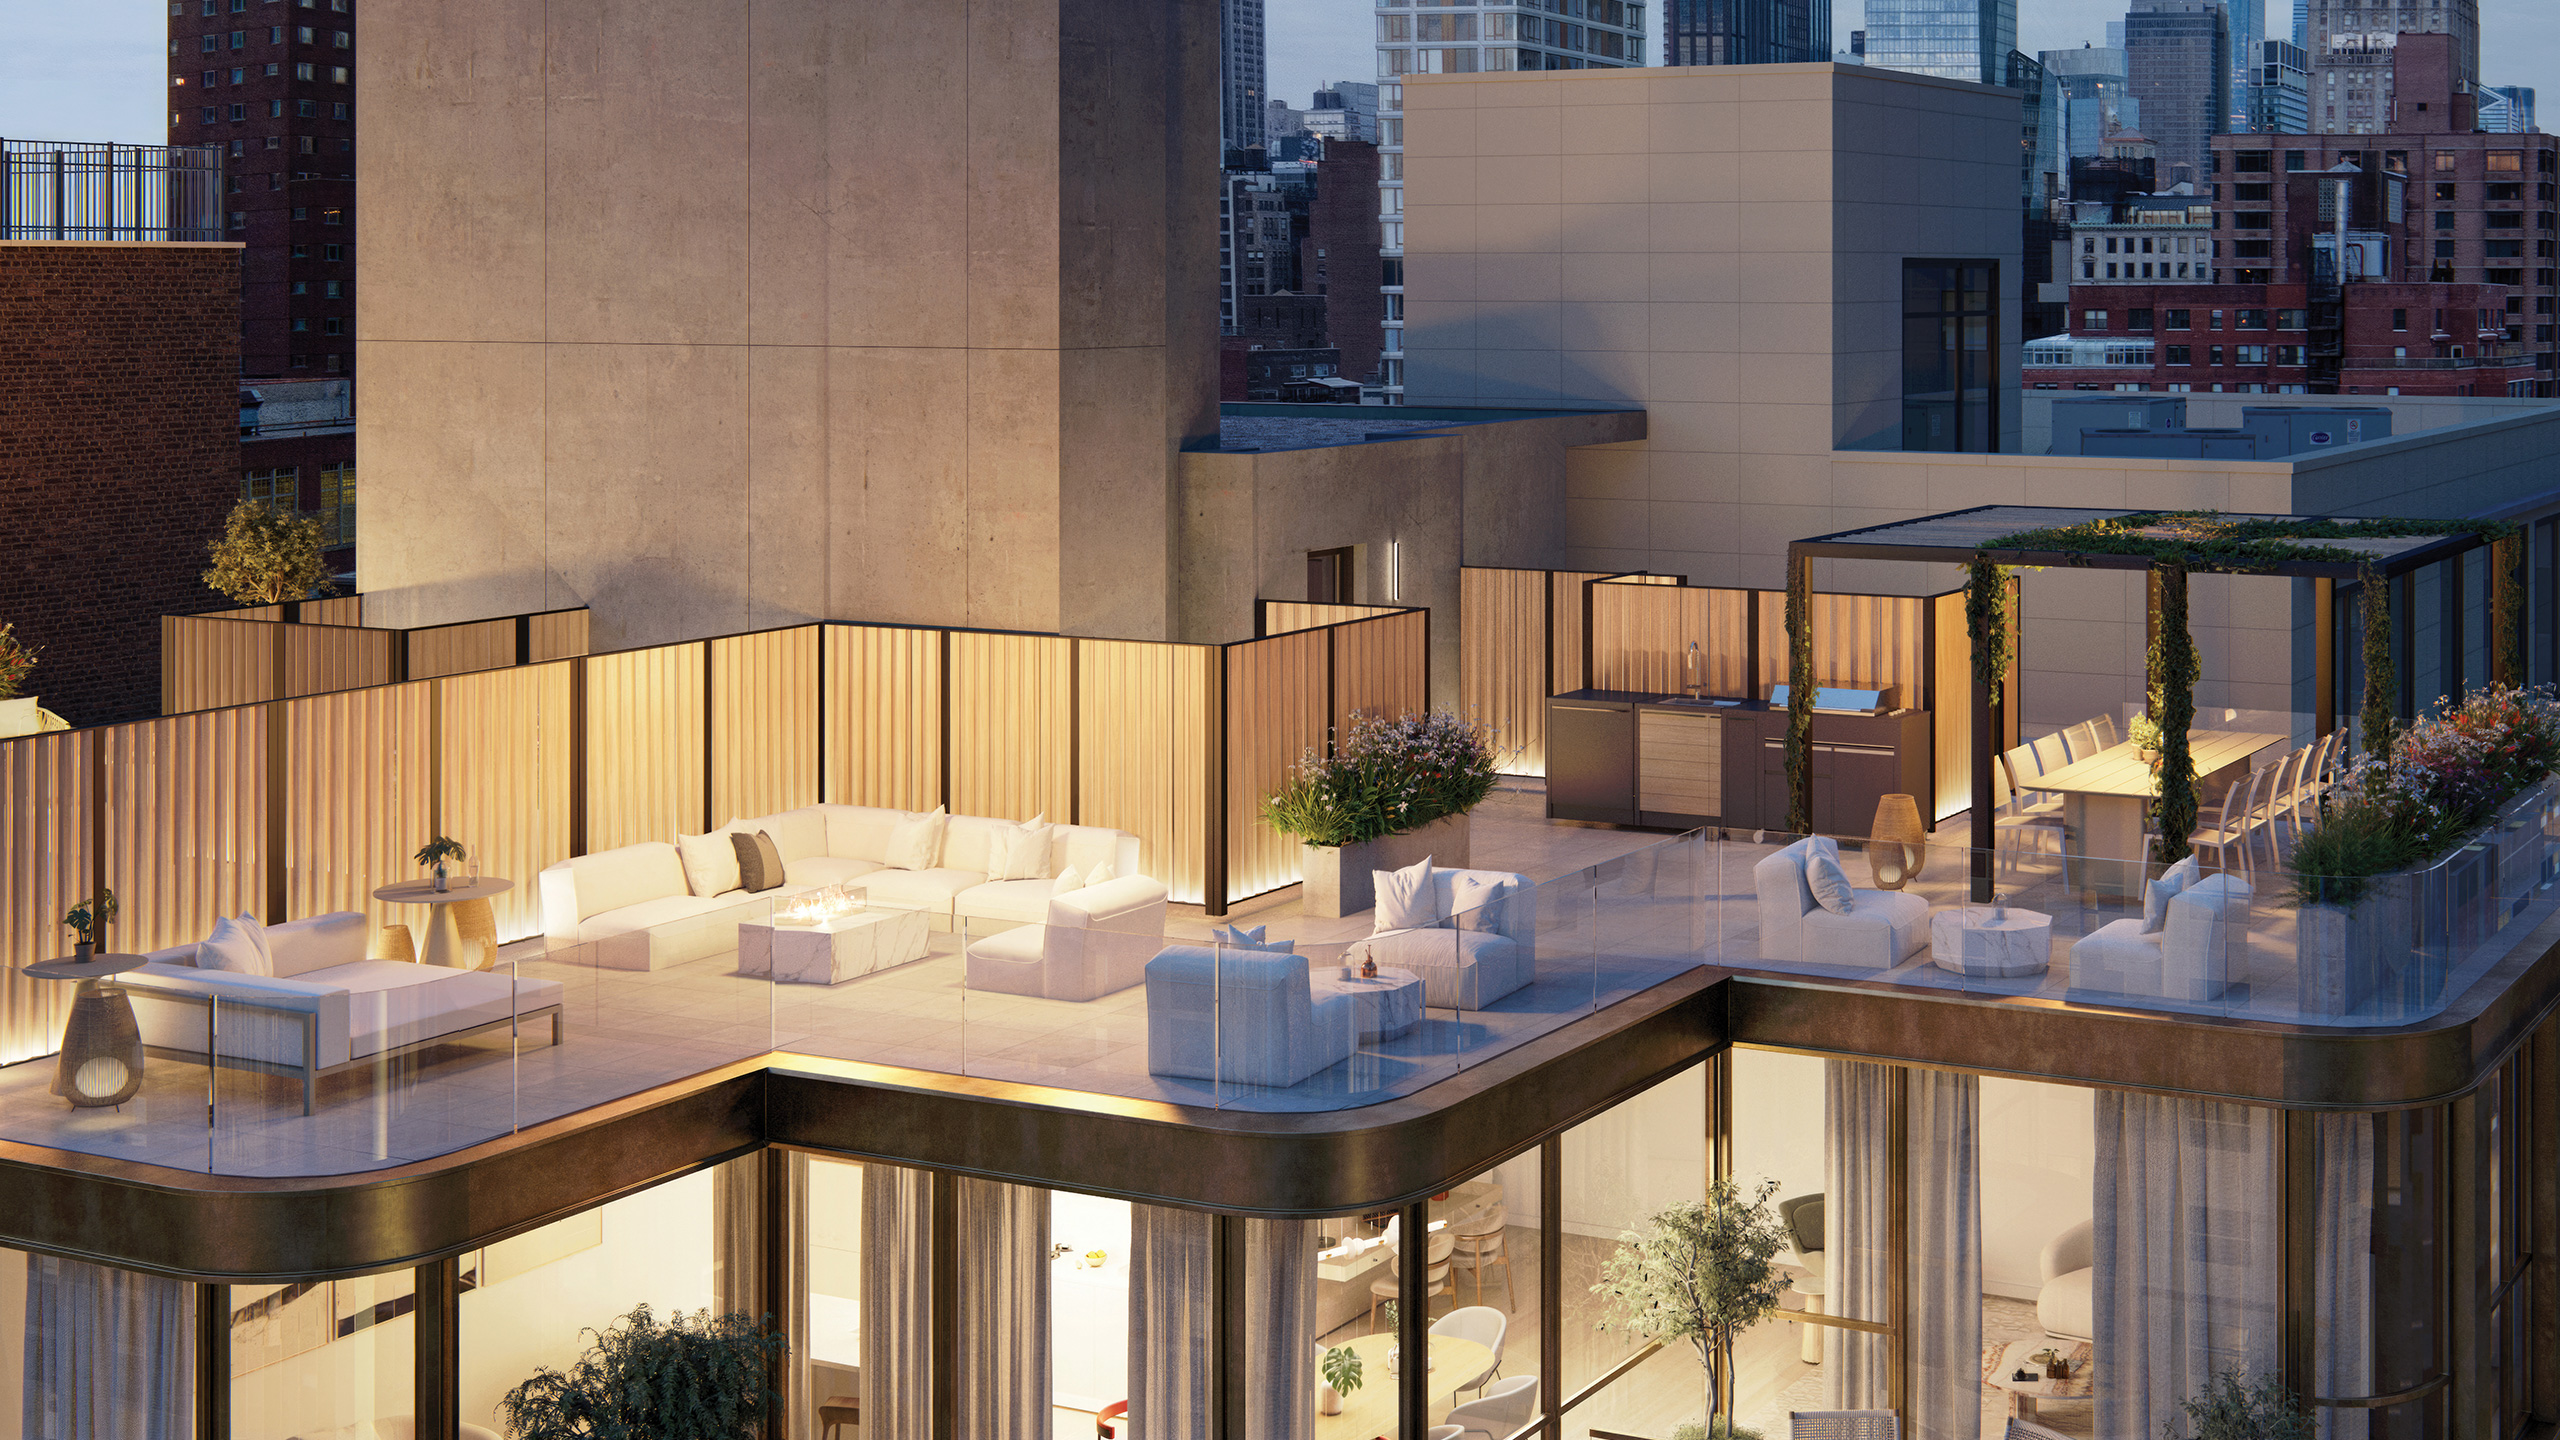 Luxurious landscaped rooftop lounge with couches and dining at Hendrix House NYC condominiums in Kips Bay.